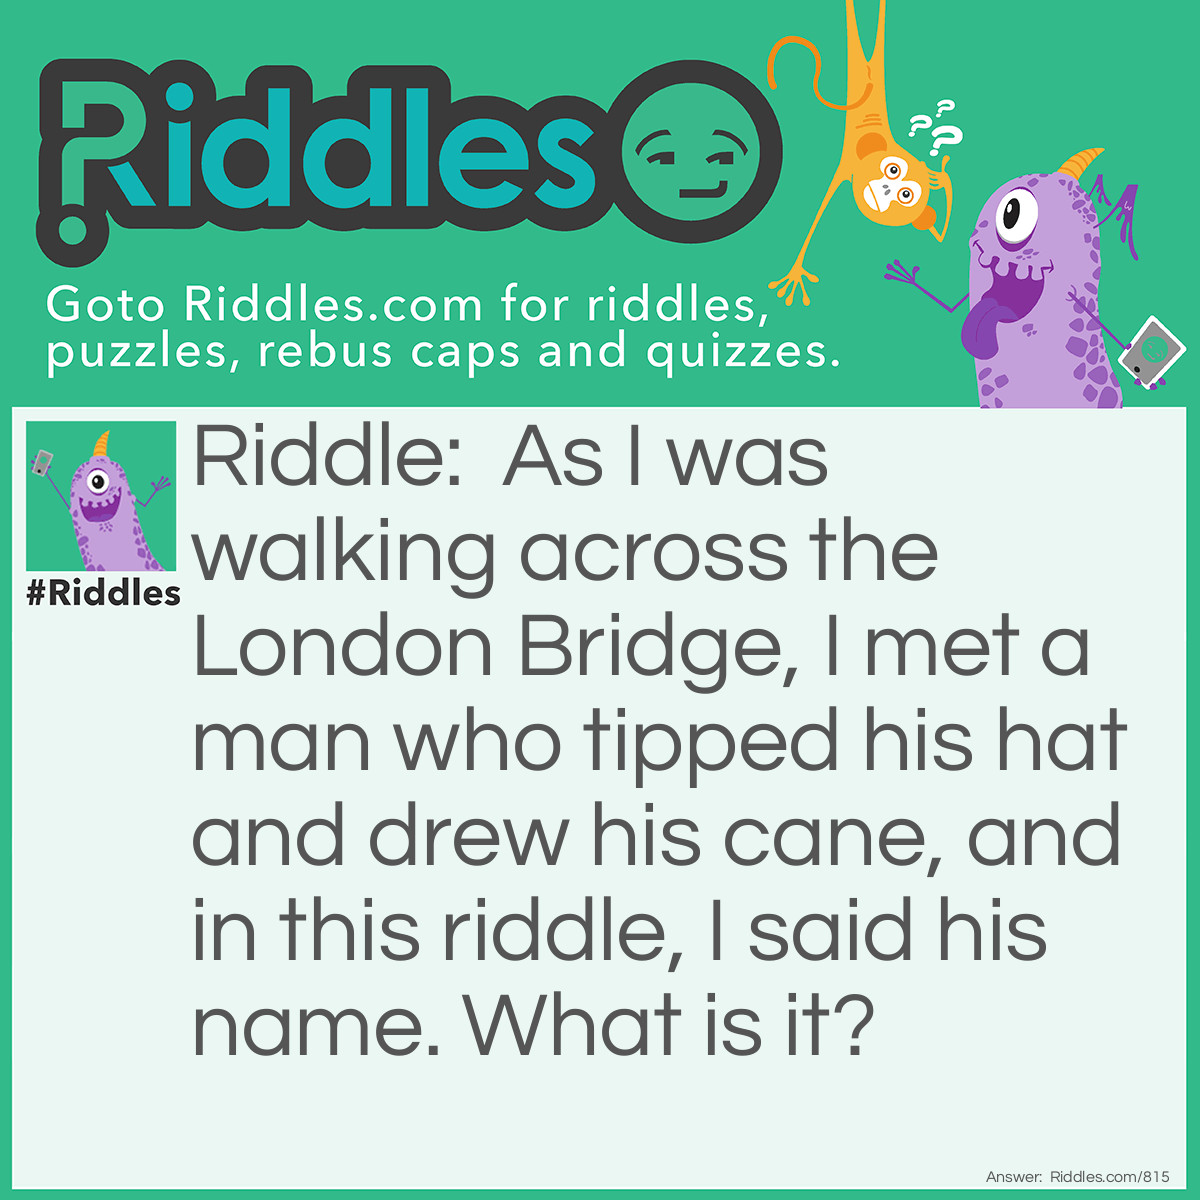 Riddle: As I was walking across the London Bridge, I met a man who drew his hat and drew his cane, and in this riddle, I said his name. What is it? Answer: And drew = ANDREW.